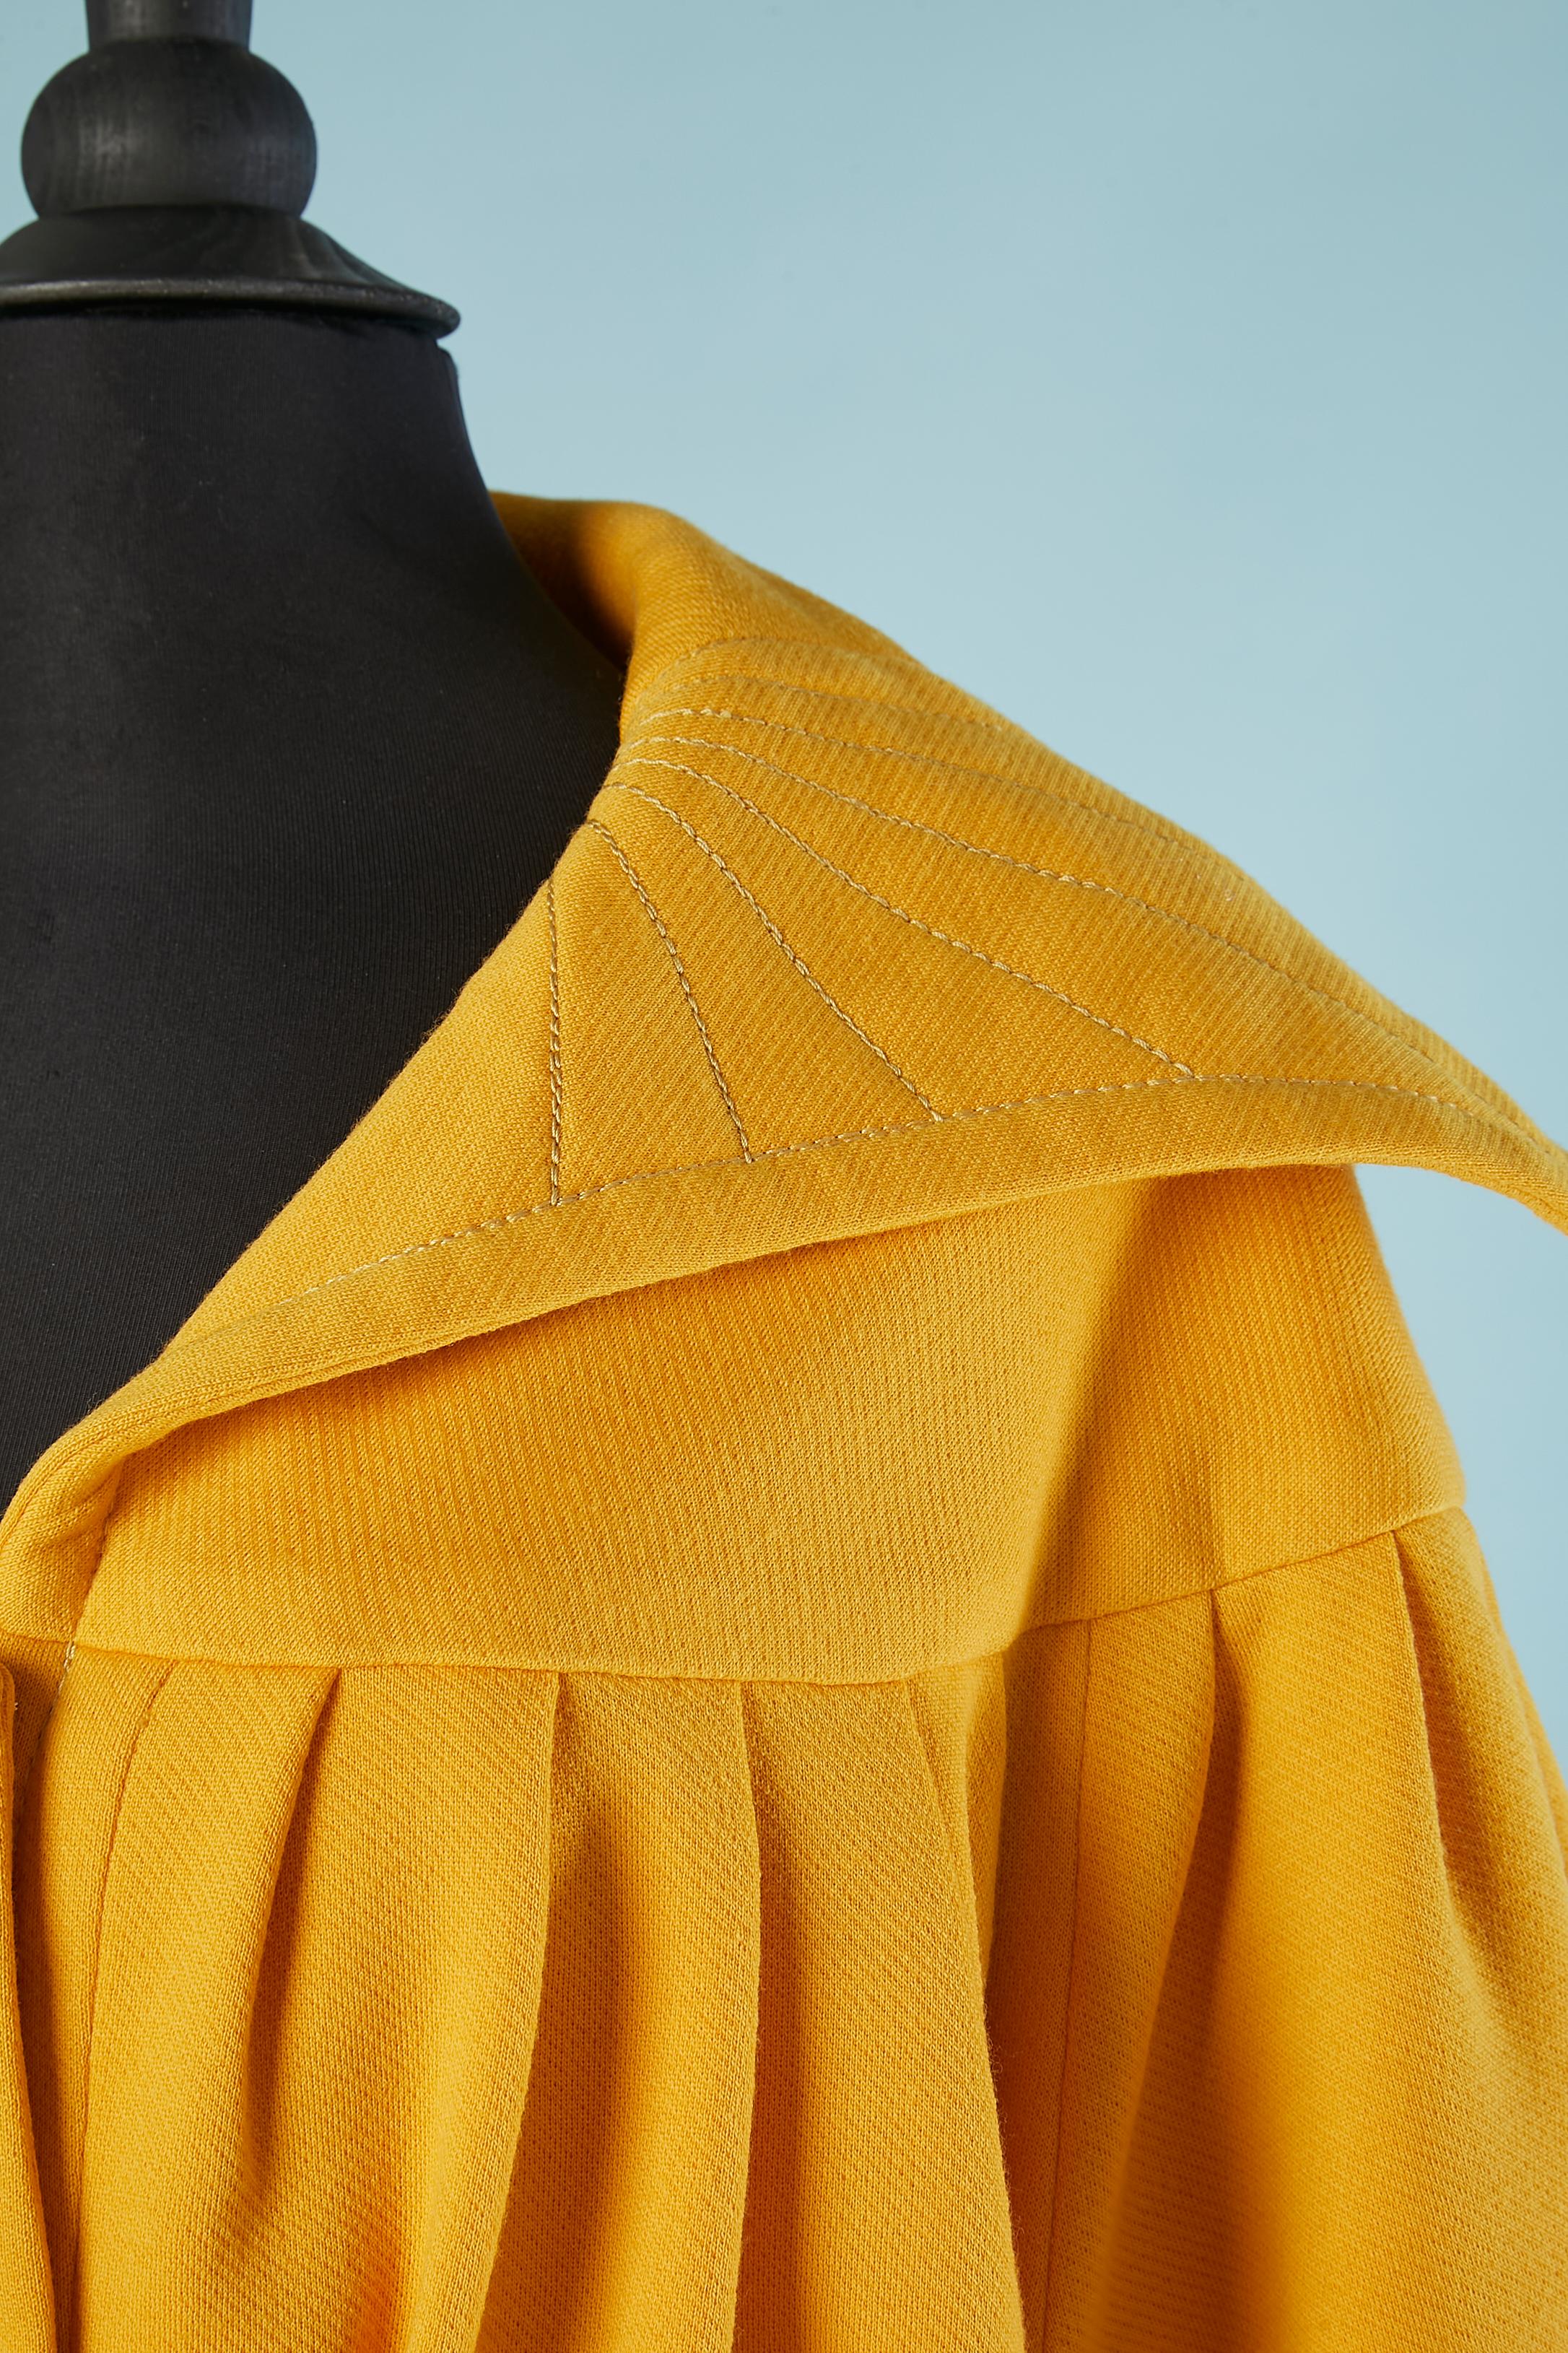 Wool jersey trouser and jacket ensemble with belt. Acetate or rayon yellow lining. Pleated on the bust and back. 3 buttons in the middle front and on cuffs. Top-stitched on the collar and on the side of legs. 
SIZE L 